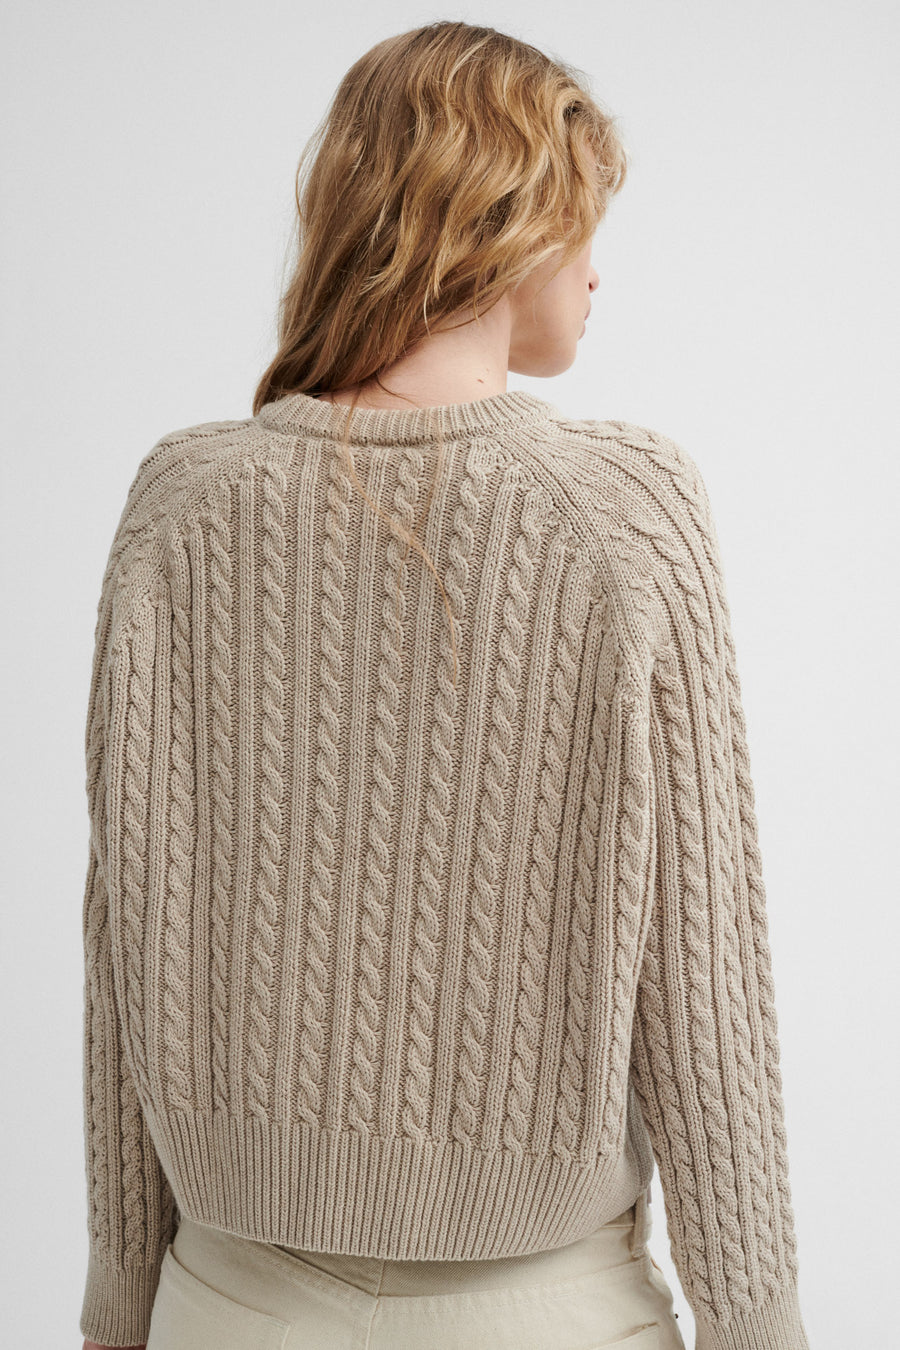 Sweater in organic cotton / 16 / 14 / dust storm